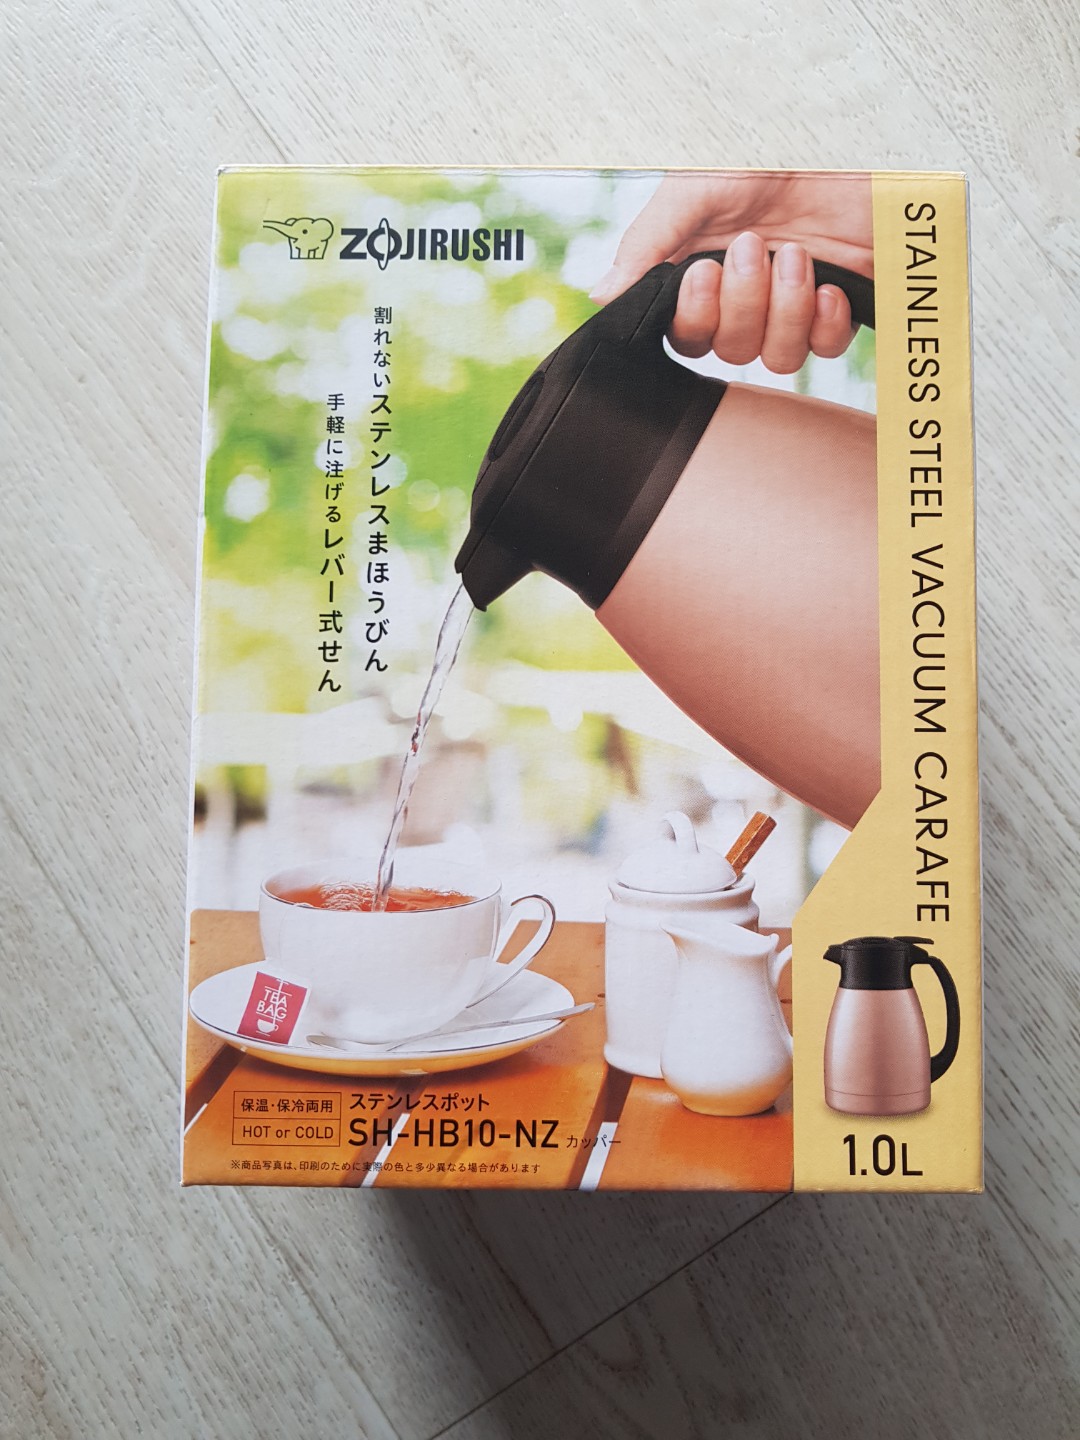 ZOJIRUSHI Stainless steel pot 1.0L SH-HB 10-NZ from Japan* 